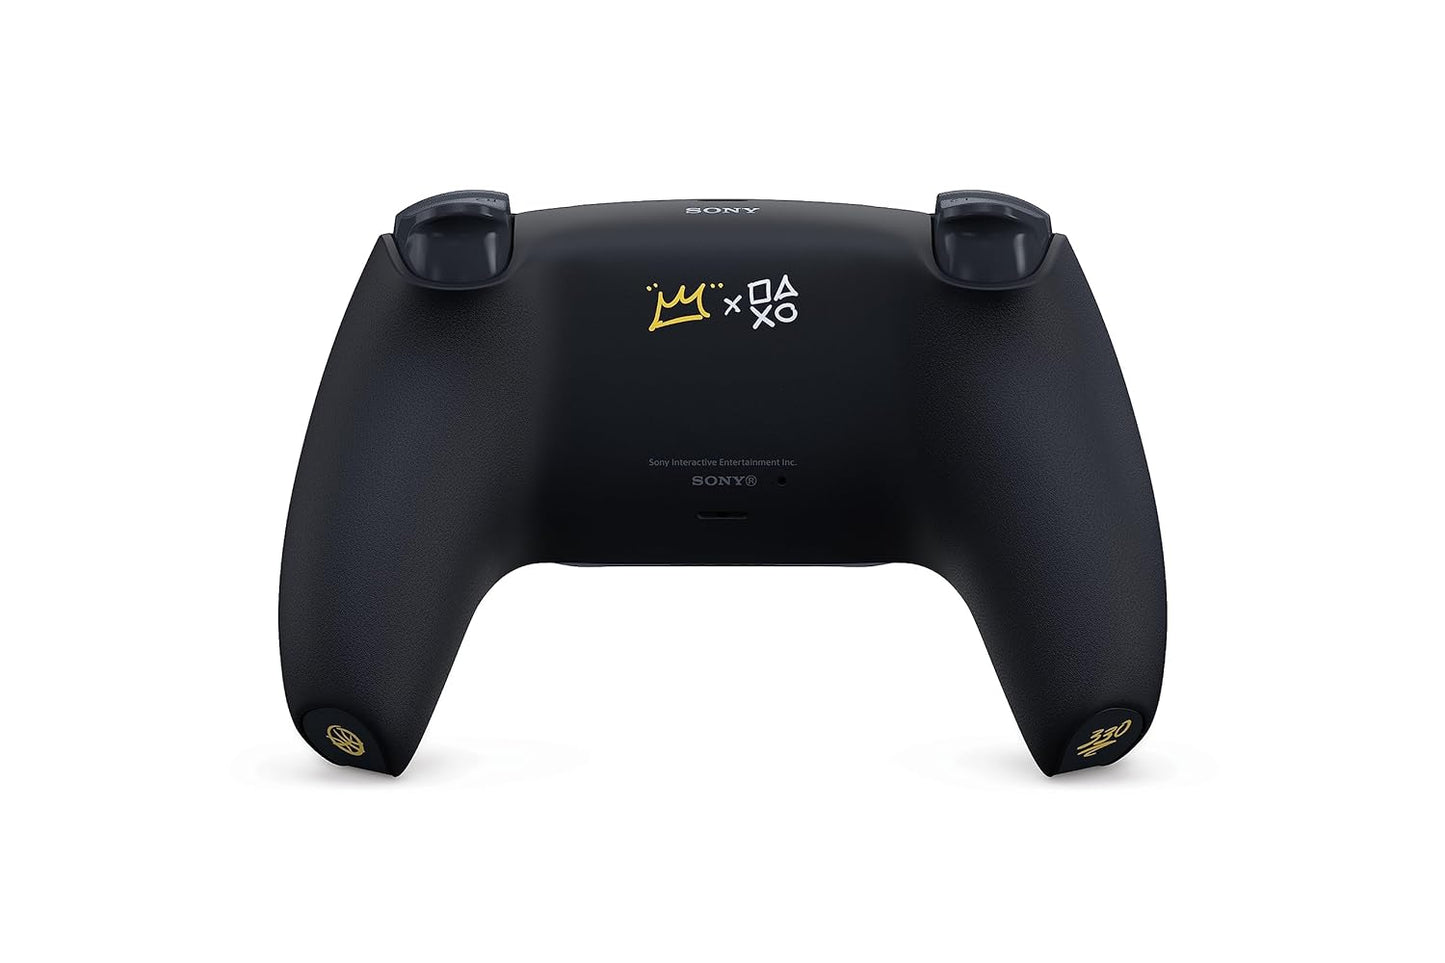 Playstation 5 DualSense Wireless Controller - LeBron James Limited Edition